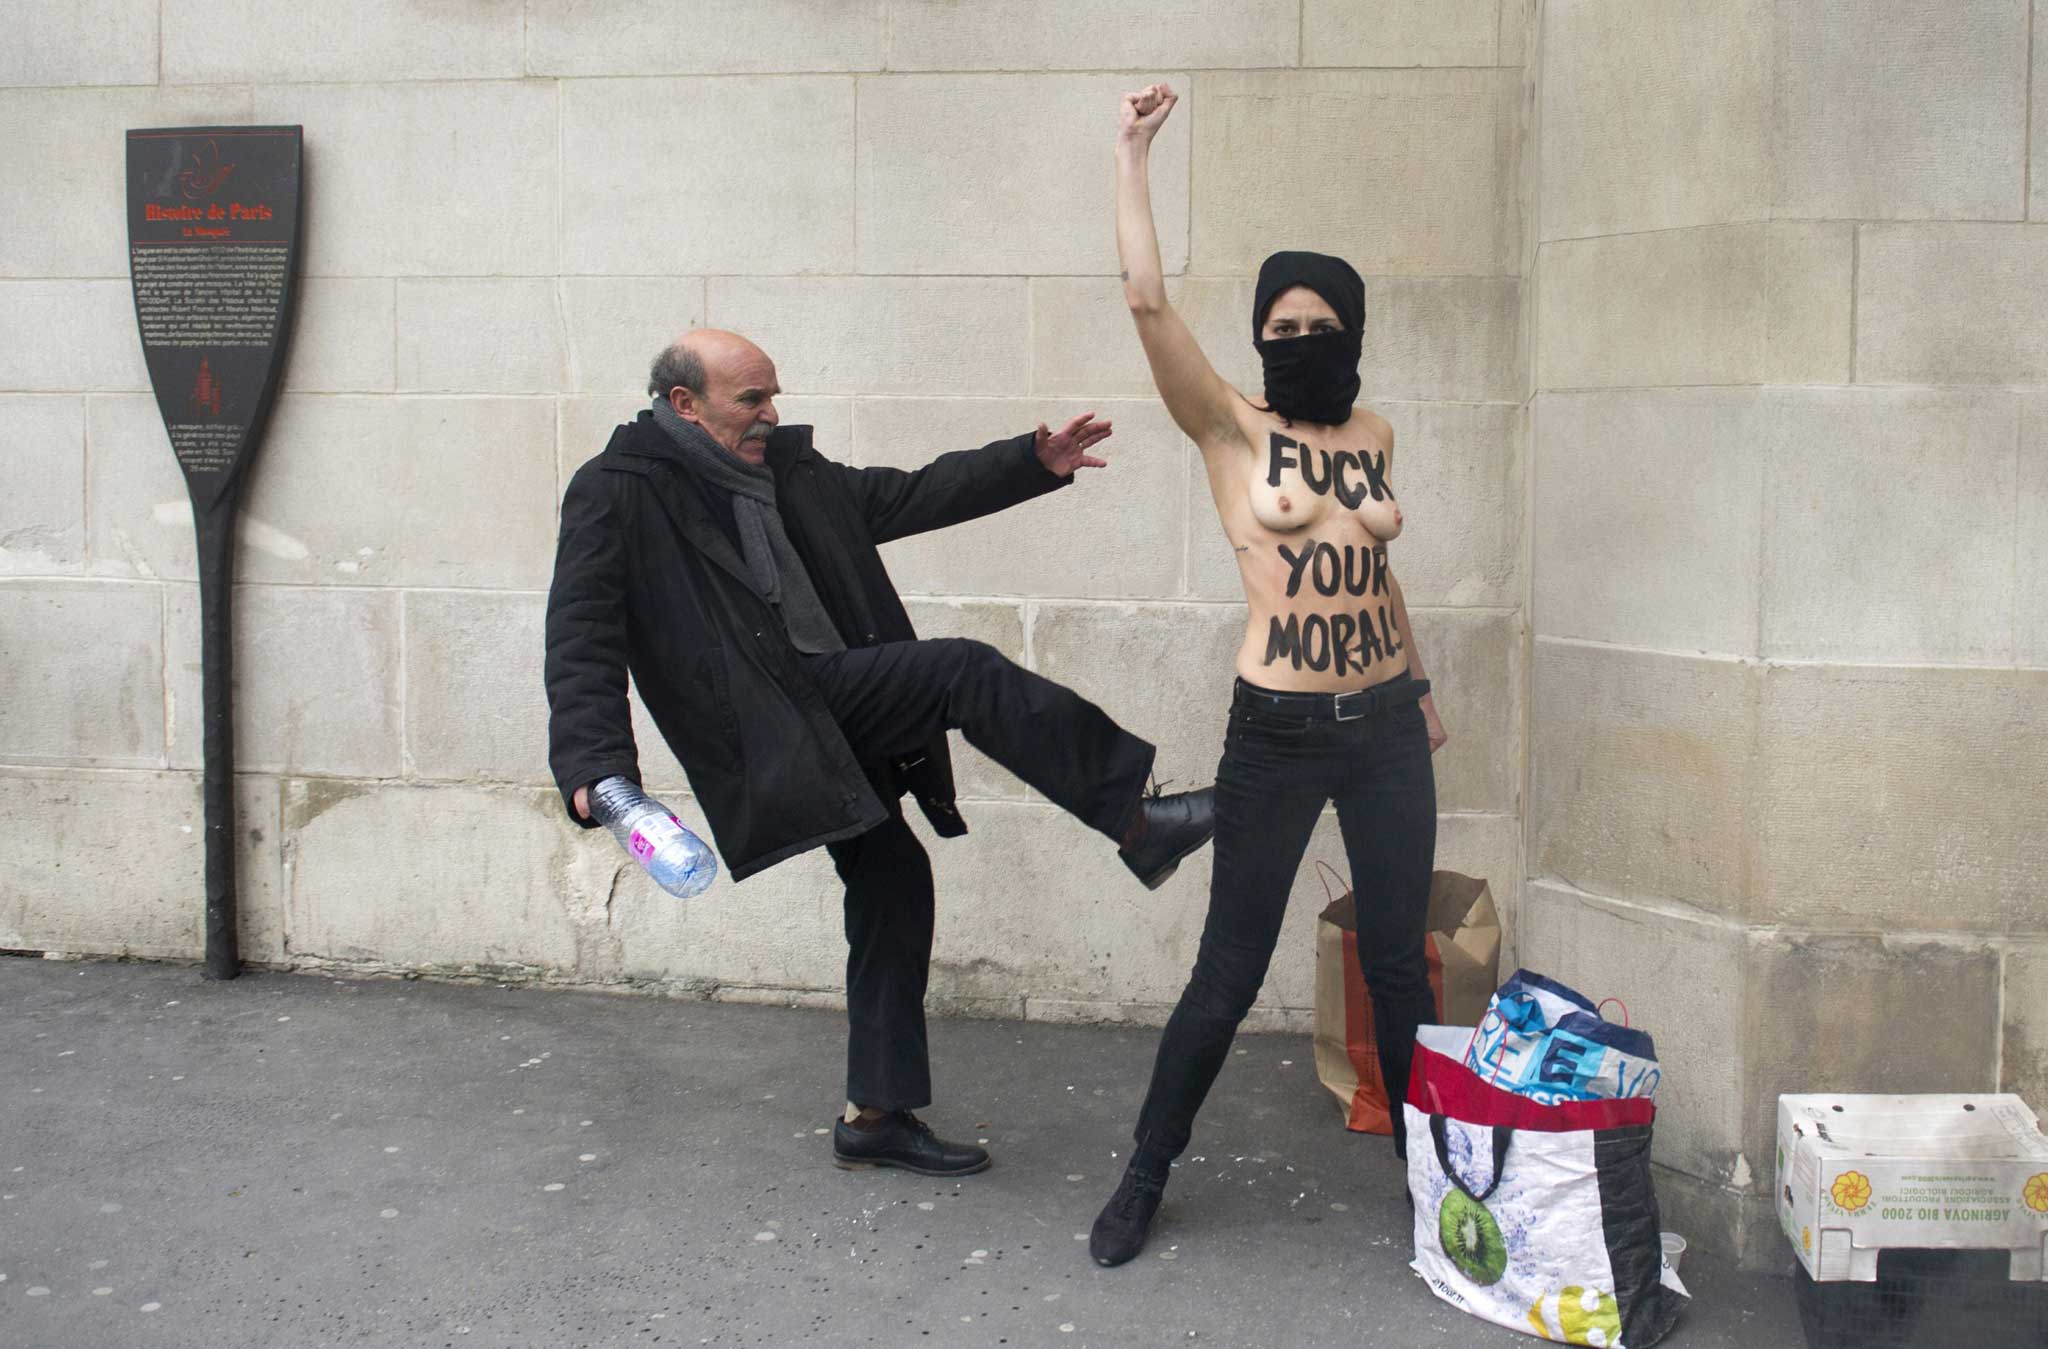 Veiled threat: a topless activist from Femen under attack in front of the Great Mosque of Paris last year